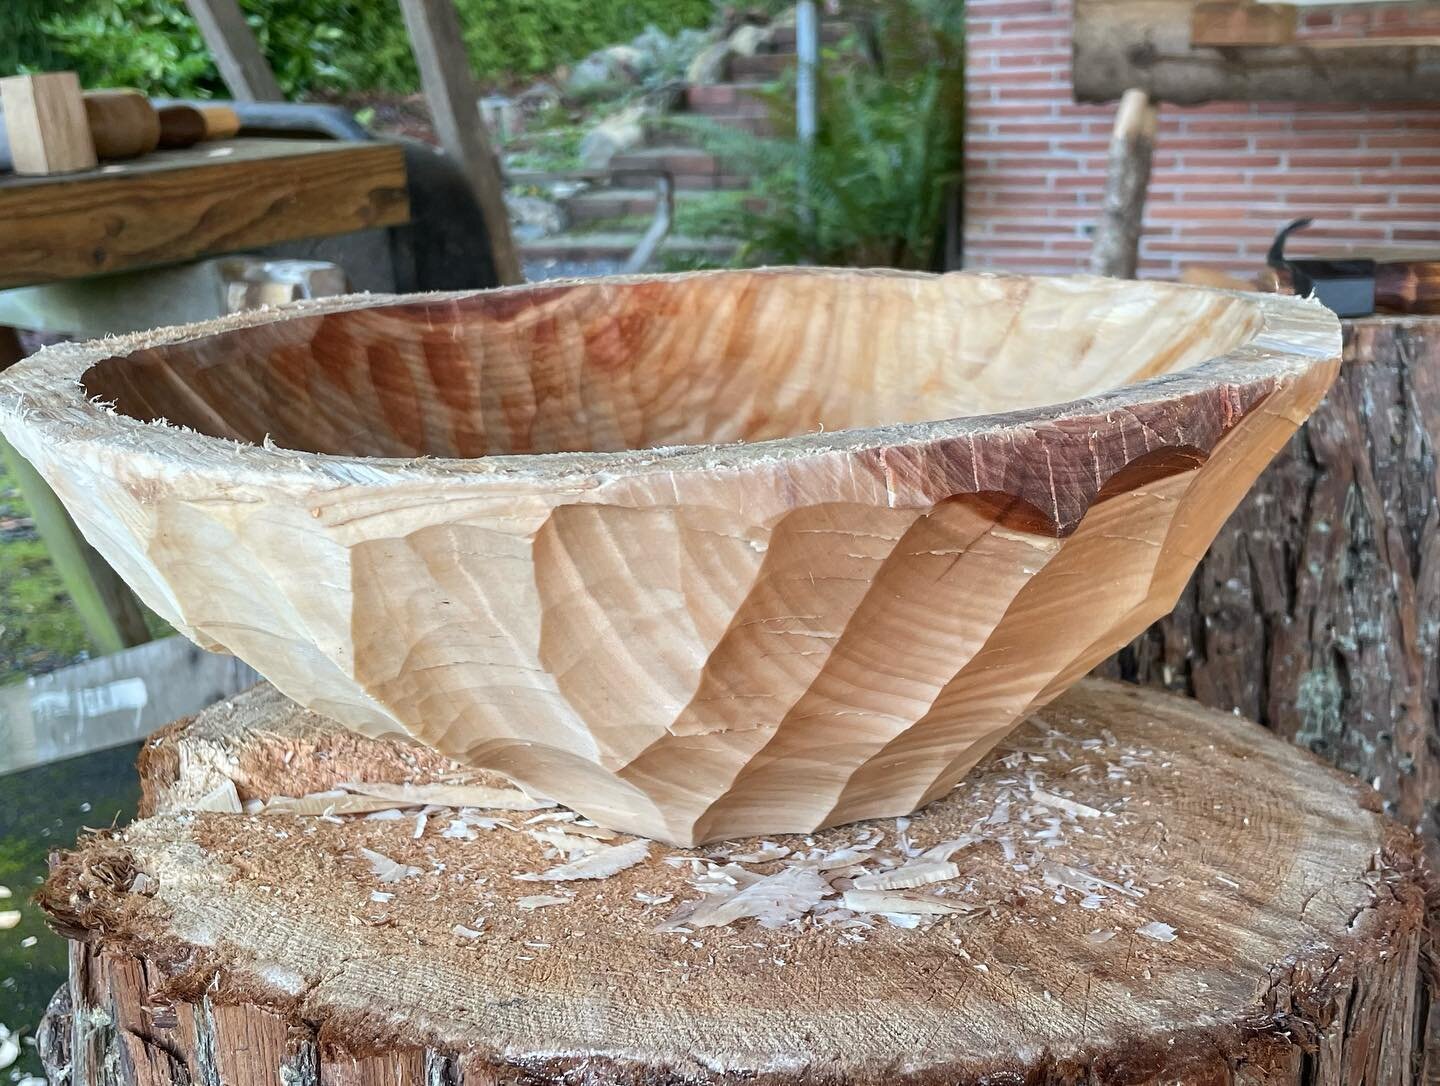 New rough cut maple bowl in progress! We had a huge storm a month or so ago and a big leaf maple came down among some other evergreens. Now I have way too much wood to know what to do with. See last photos in post. 

#greenwoodcarving #woodenbowl #ha